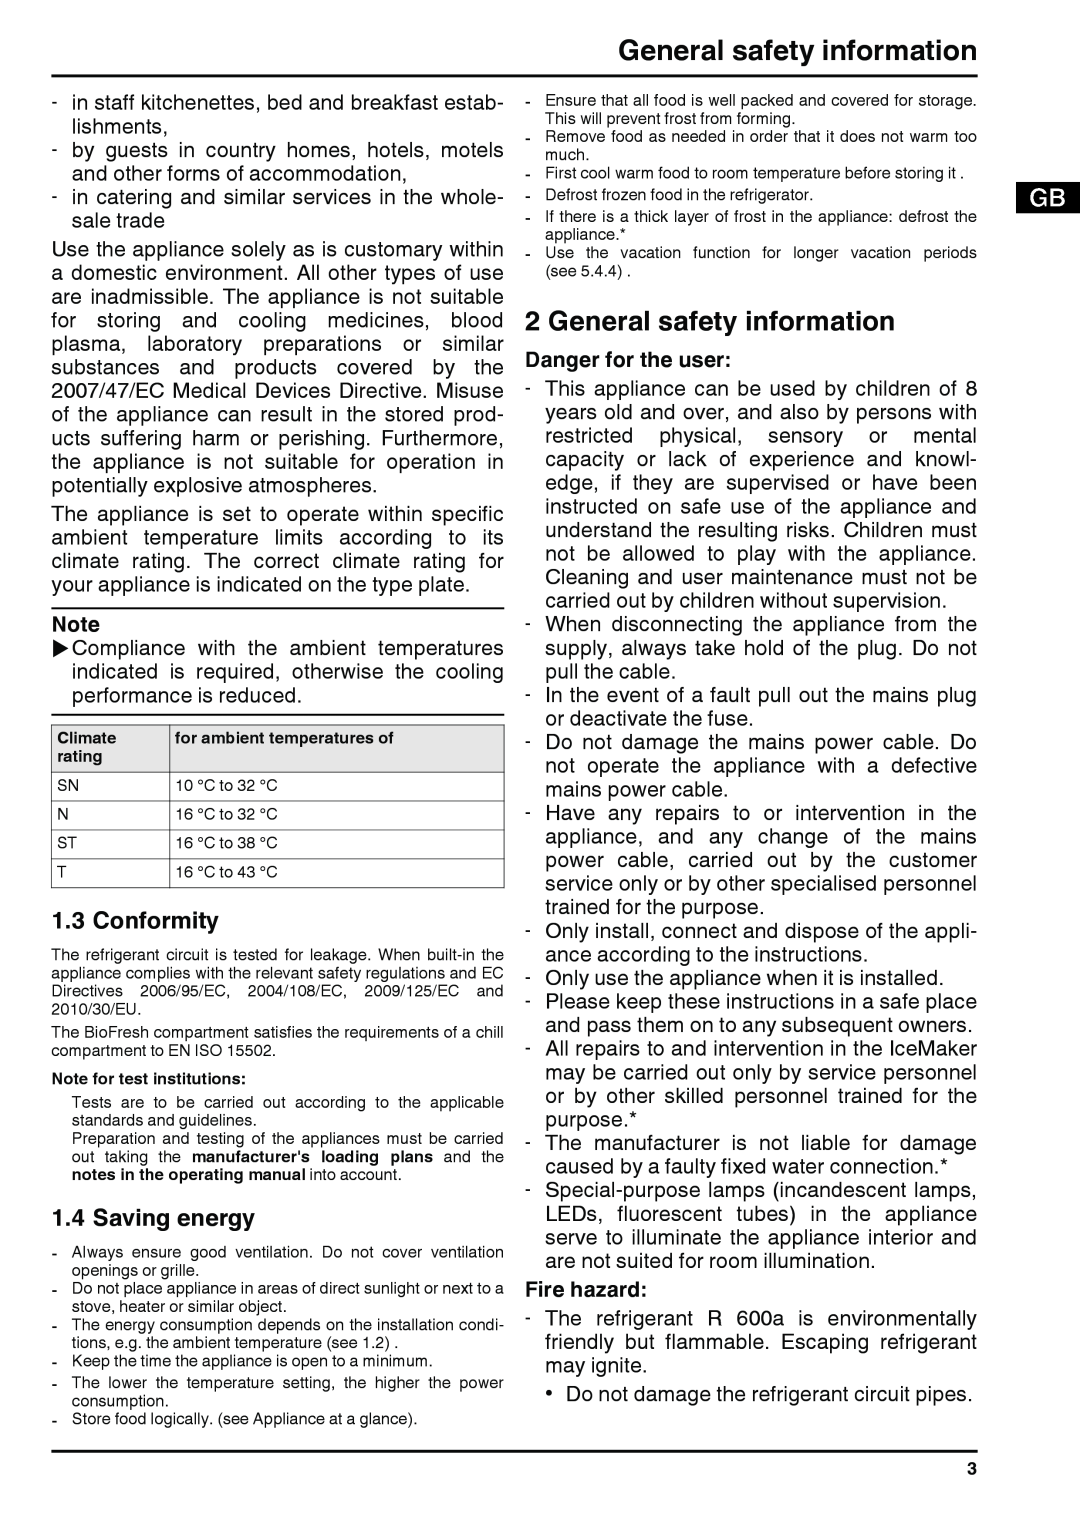 Liebherr 180613 7085462-00 manual General safety information, Conformity, Saving energy, Danger for the user, Fire hazard 